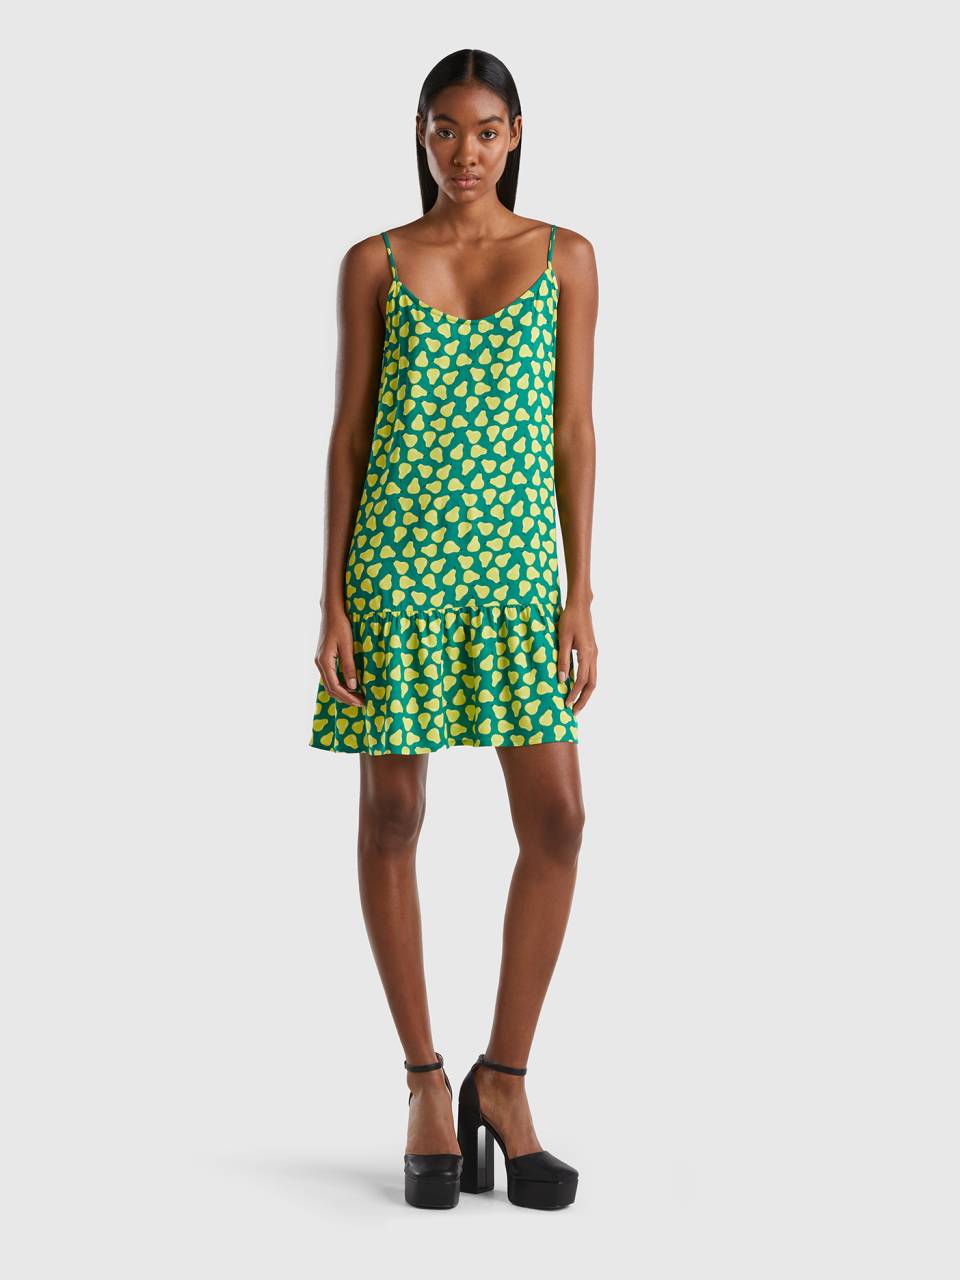 Benetton green dress with pear pattern. 1